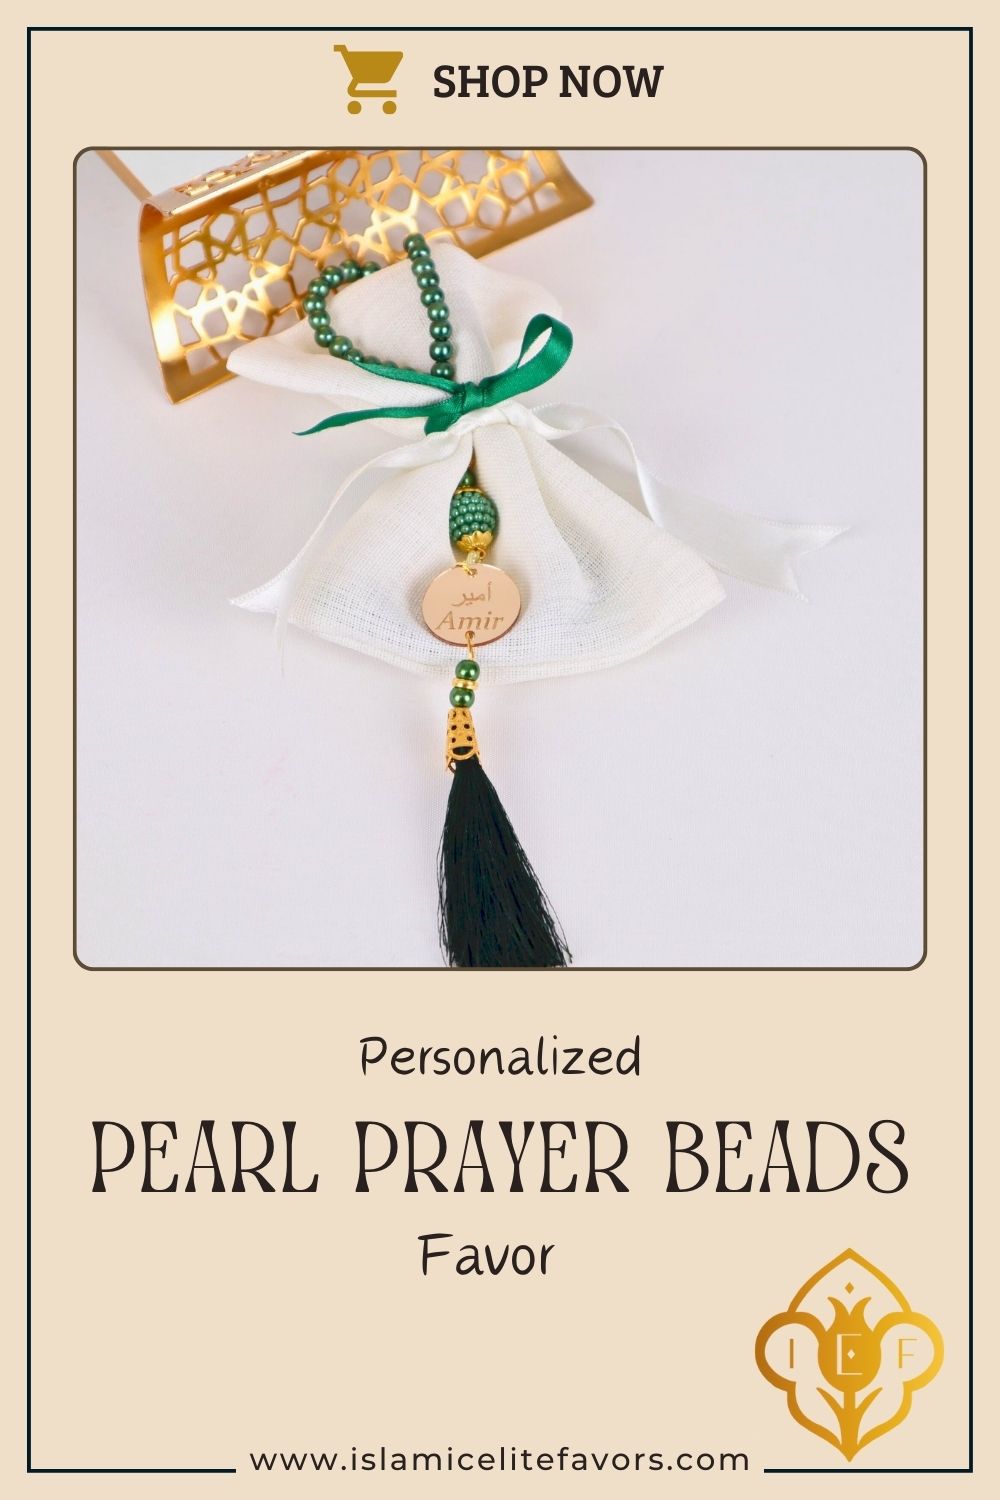 Personalized Pearl Prayer Beads in Colorful Pouch Favors for Guests - Islamic Elite Favors is a handmade gift shop offering a wide variety of unique and personalized gifts for all occasions. Whether you're looking for the perfect Ramadan, Eid, Hajj, wedding gift or something special for a birthday, baby shower or anniversary, we have something for everyone. High quality, made with love.